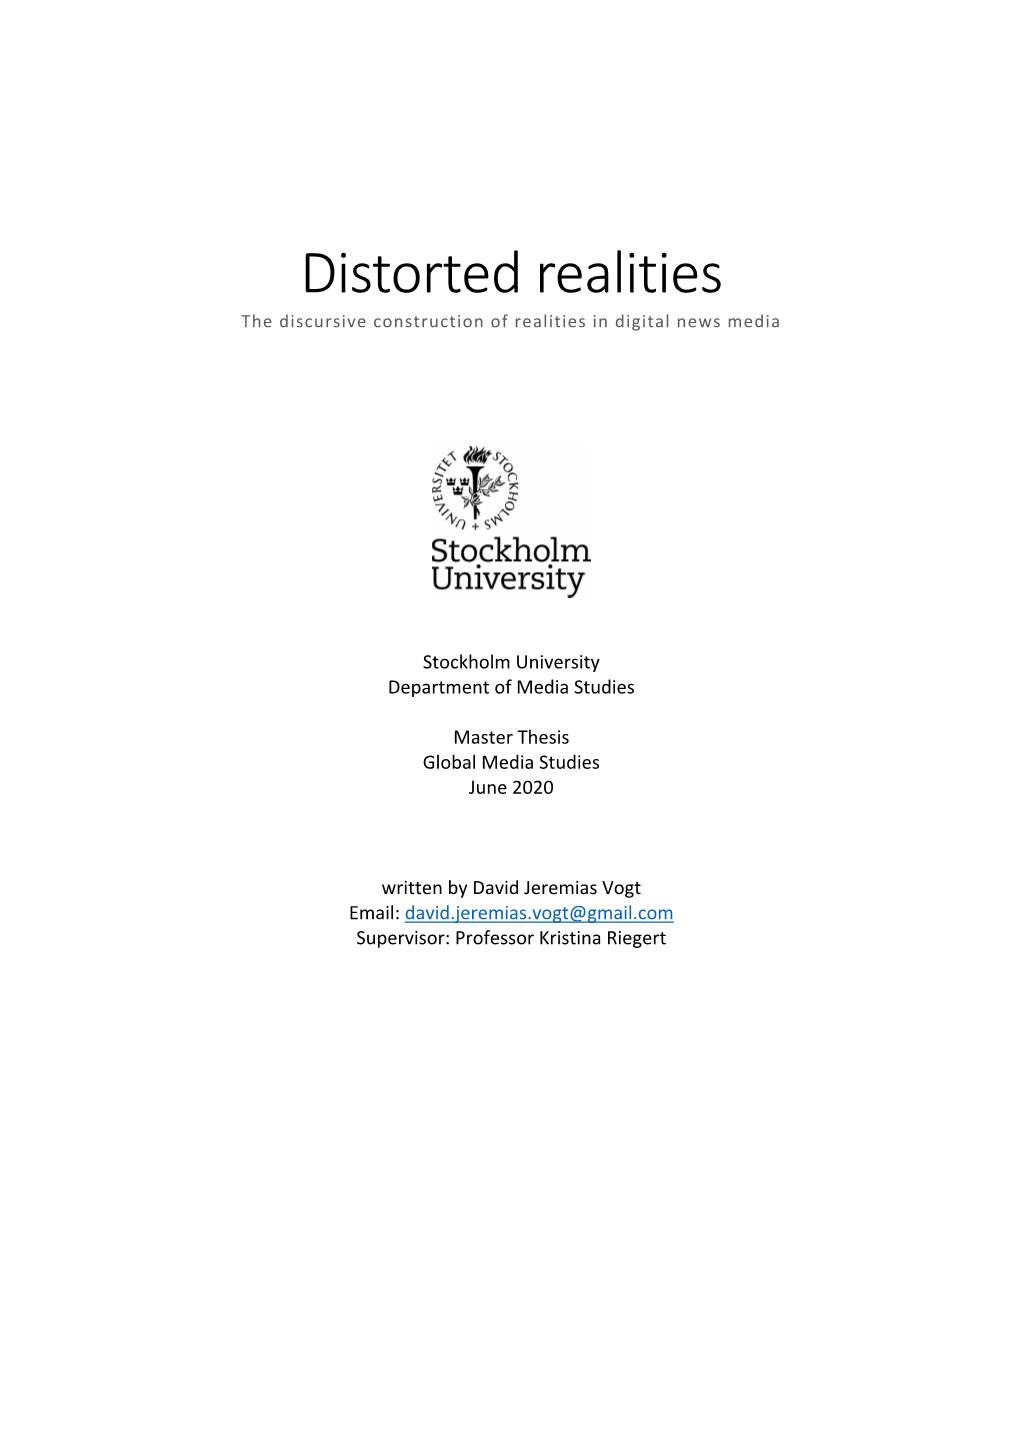 Distorted Realities the Discursive Construction of Realities in Digital News Media